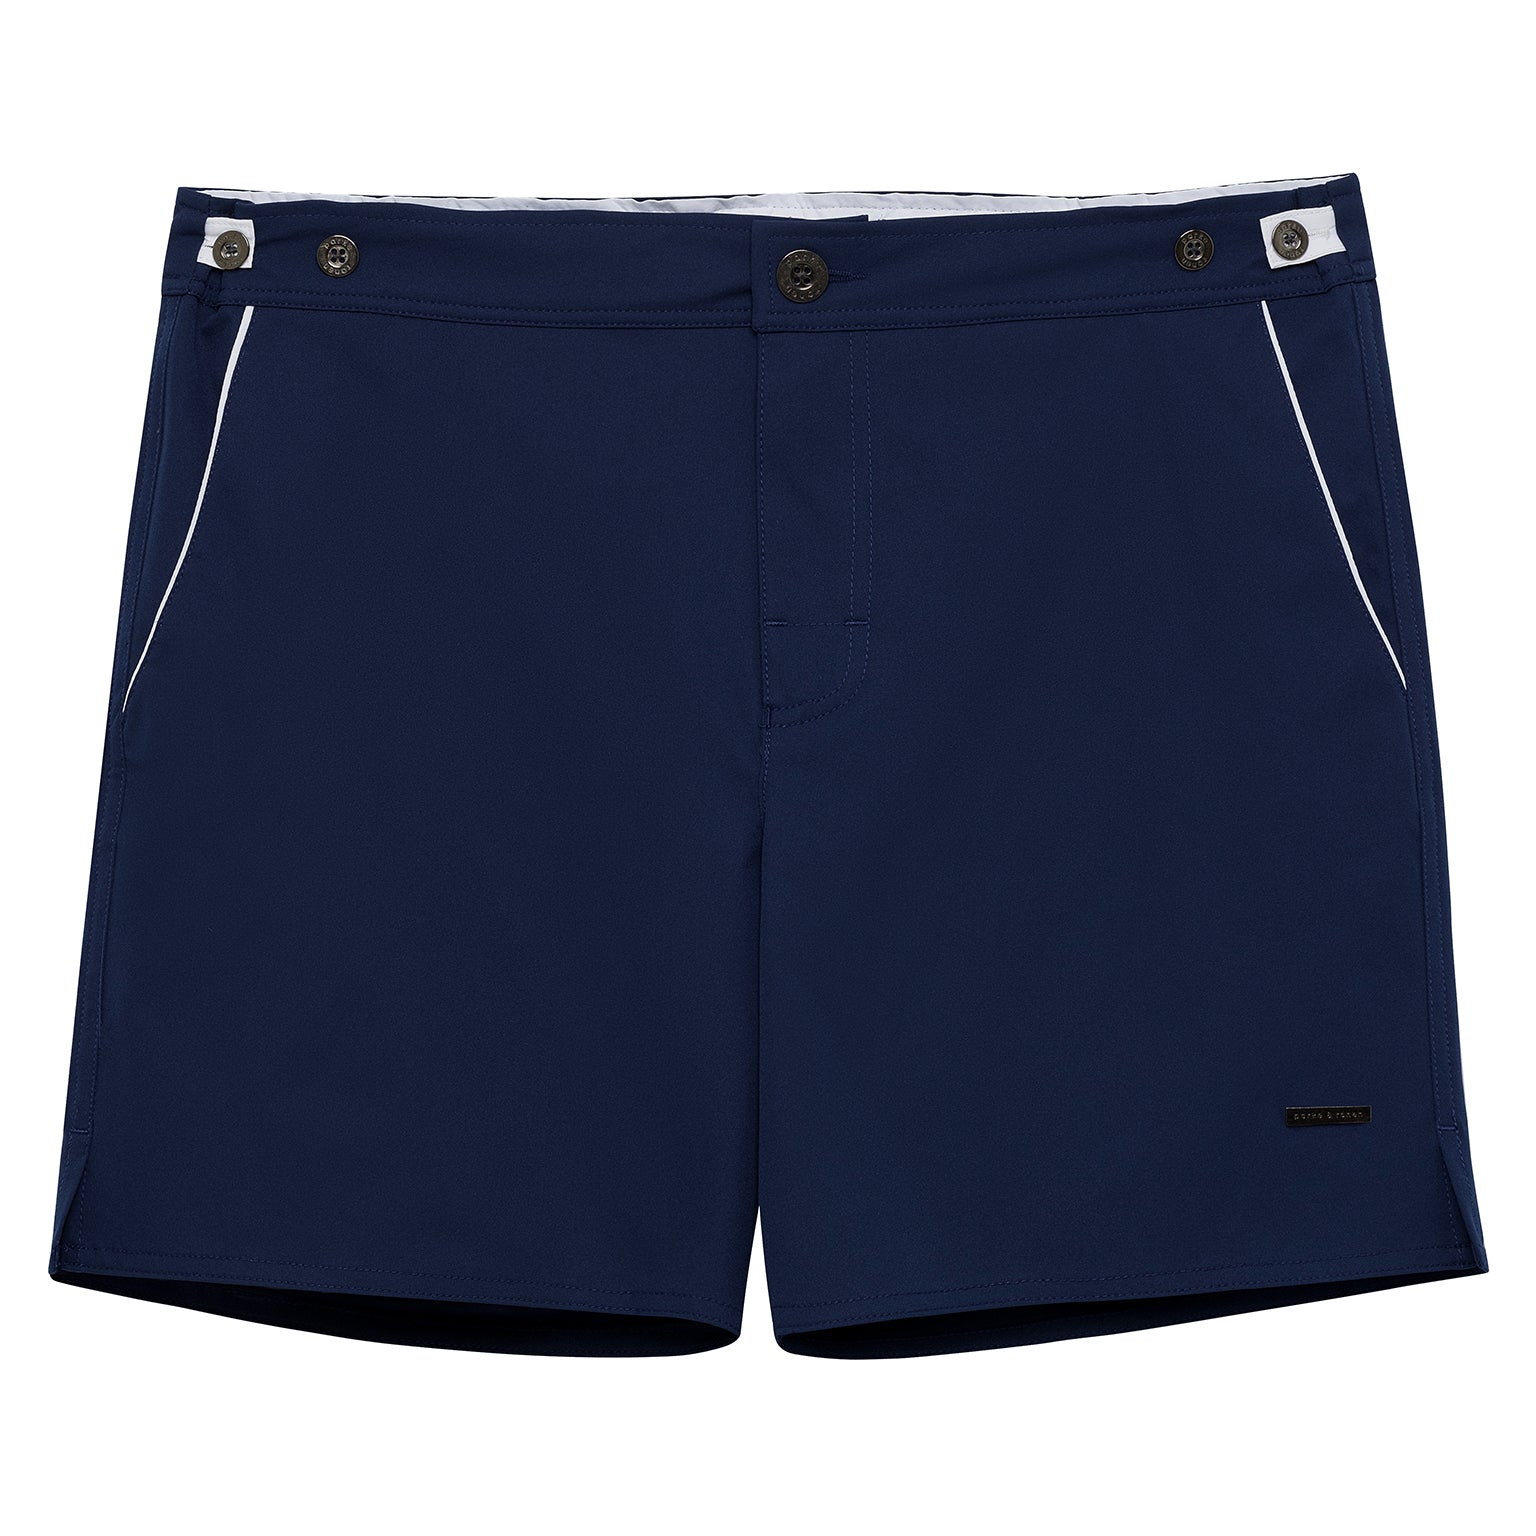 Navy 6" Catalonia Solid Stretch